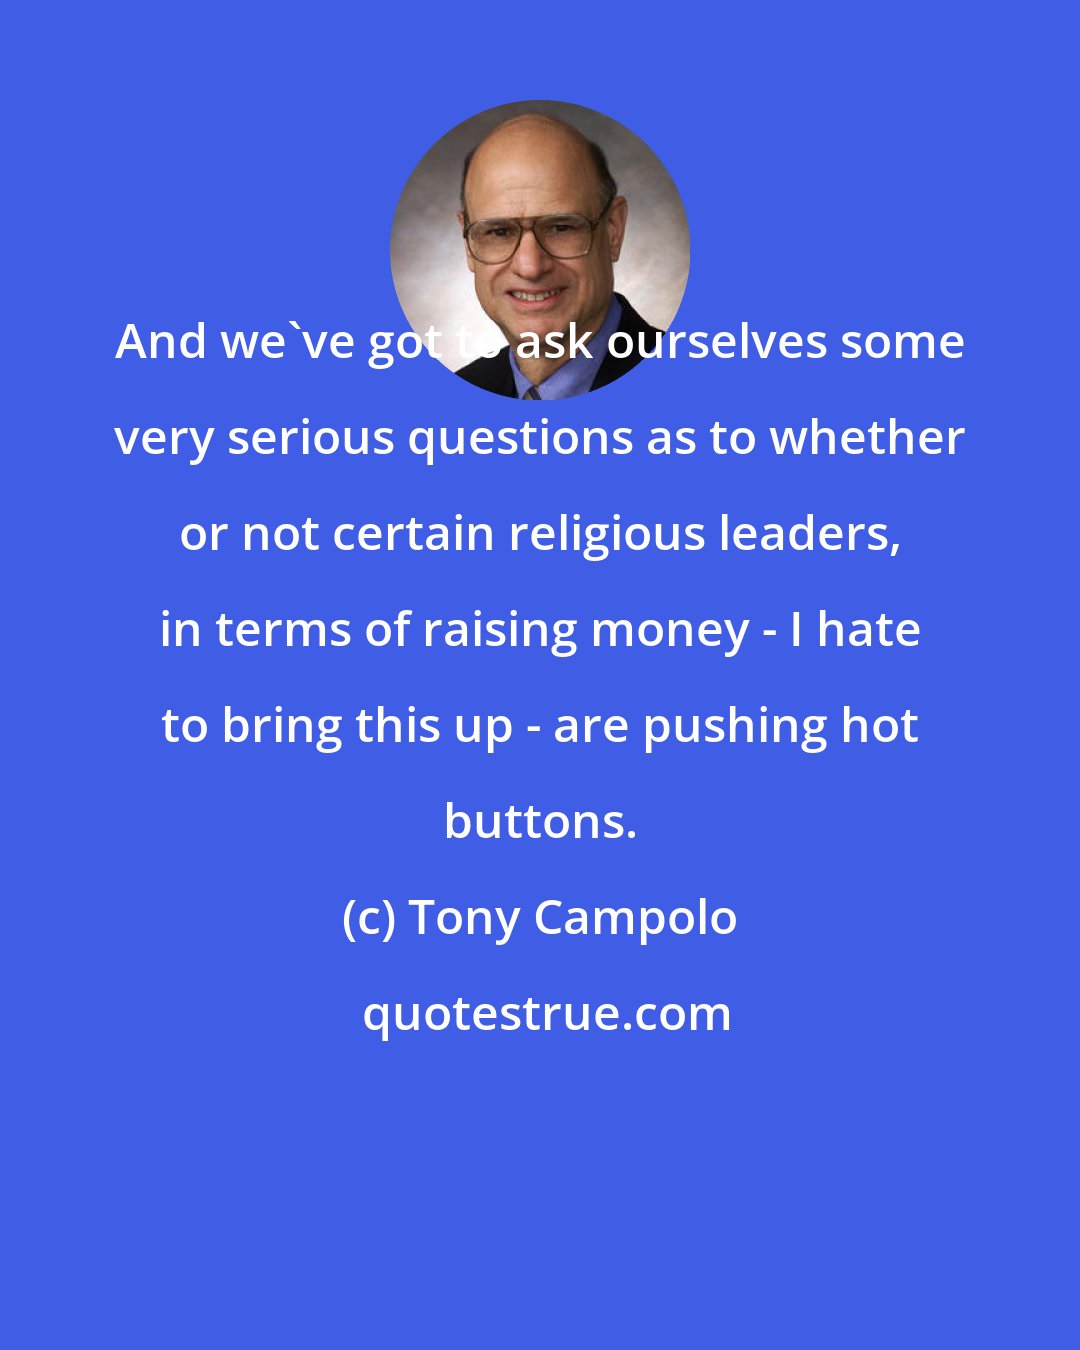 Tony Campolo: And we've got to ask ourselves some very serious questions as to whether or not certain religious leaders, in terms of raising money - I hate to bring this up - are pushing hot buttons.